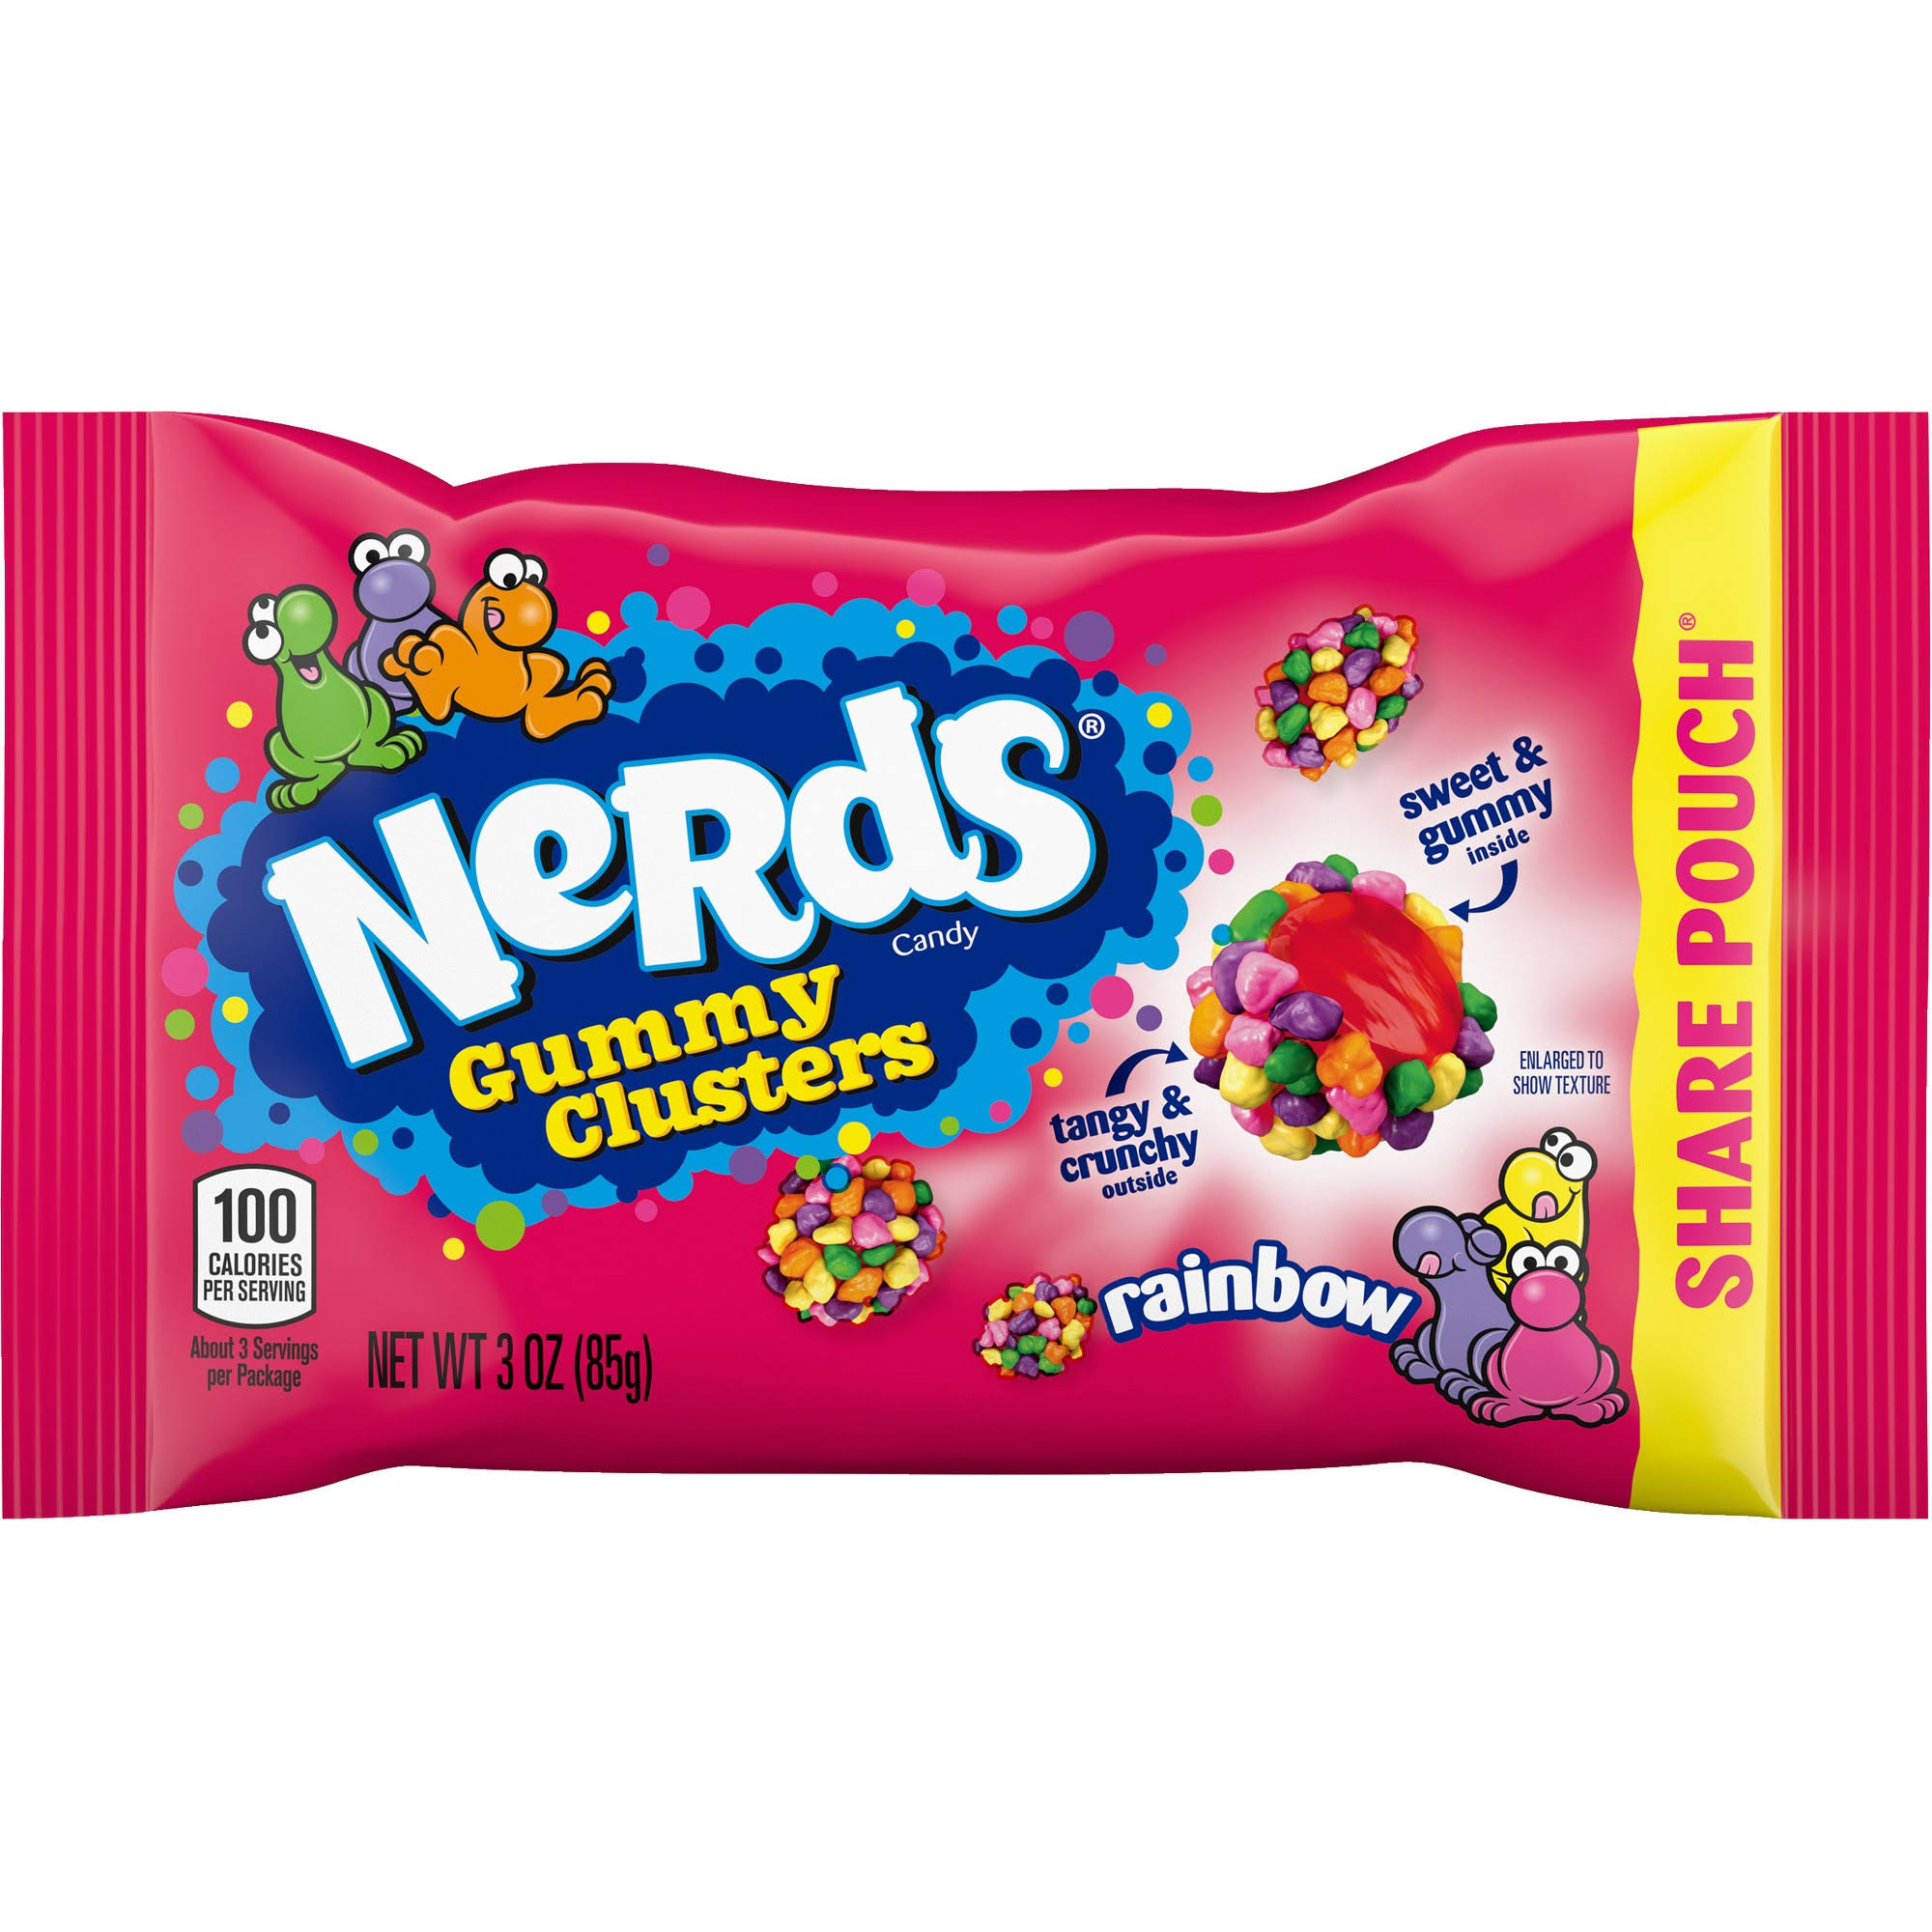 Nerds Candy, Gummy Clusters, Rainbow, Share Pouch - 3 oz